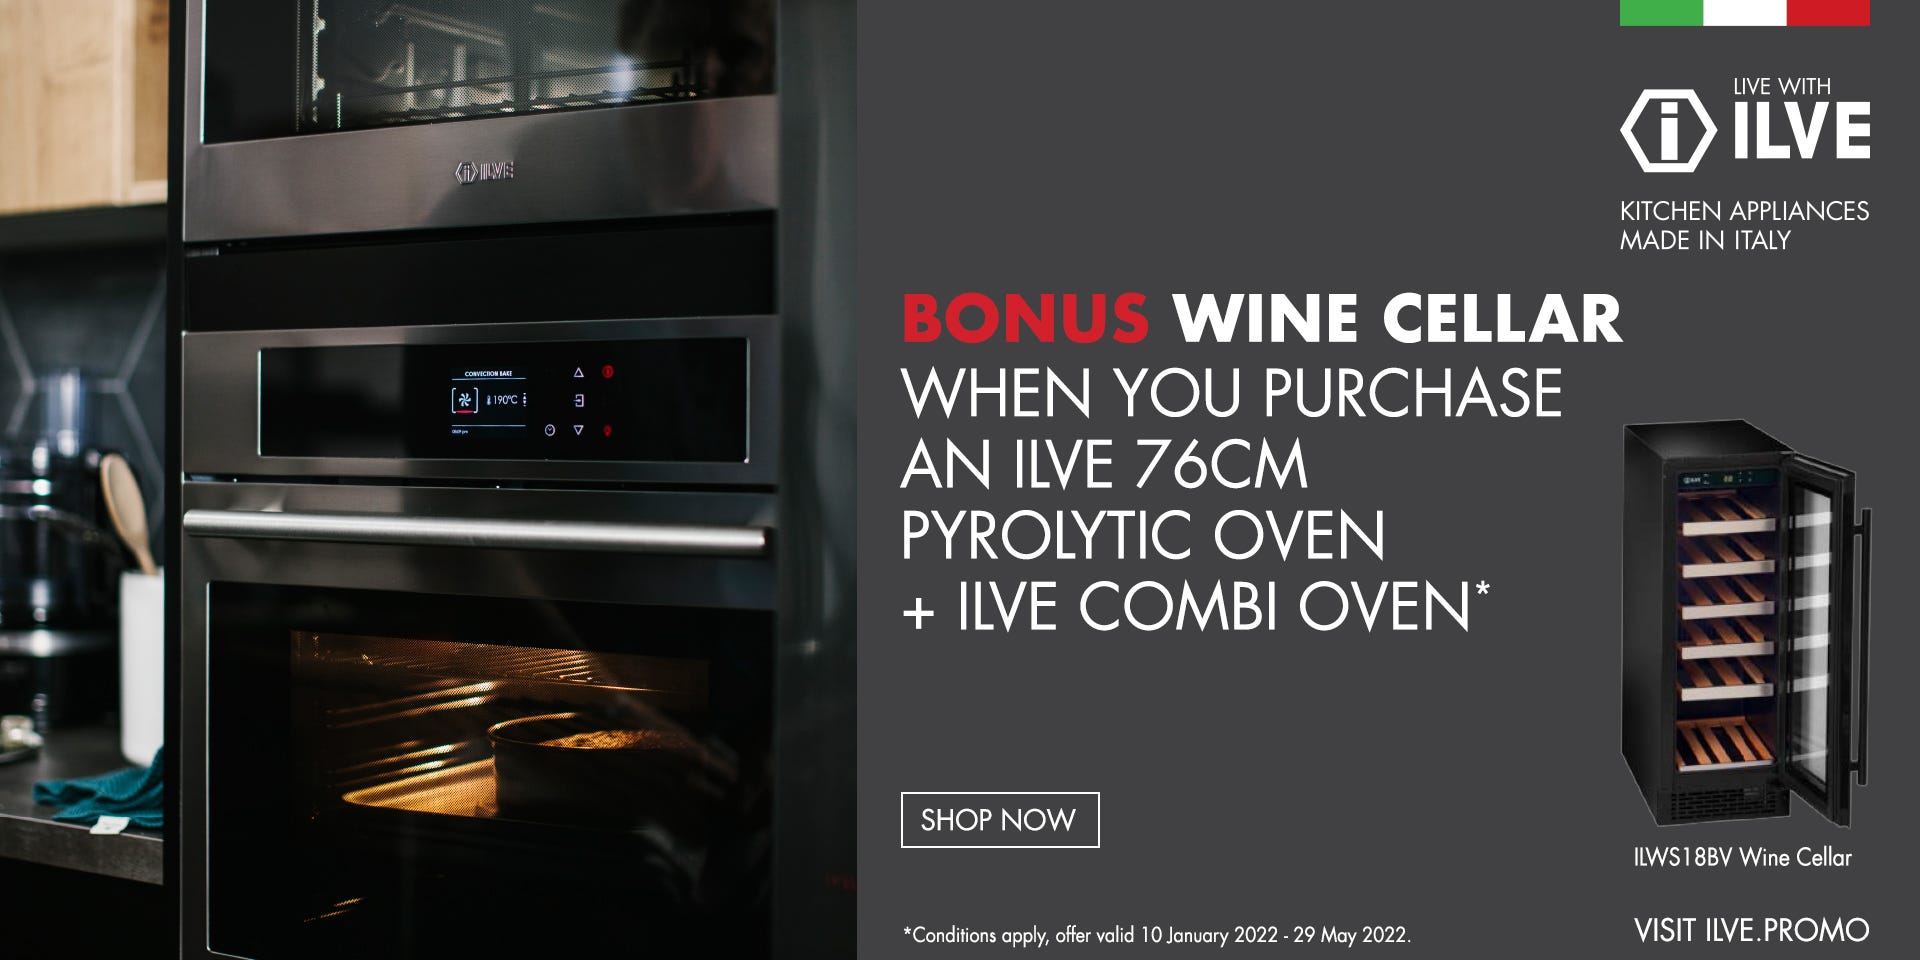 Bonus ILVE Wine Cellar* when you purchase an ILVE 76cm Pyrolytic Oven + ILVE Combi Oven*. Offer ends 29/05/22. Find out more at an e&s near you.